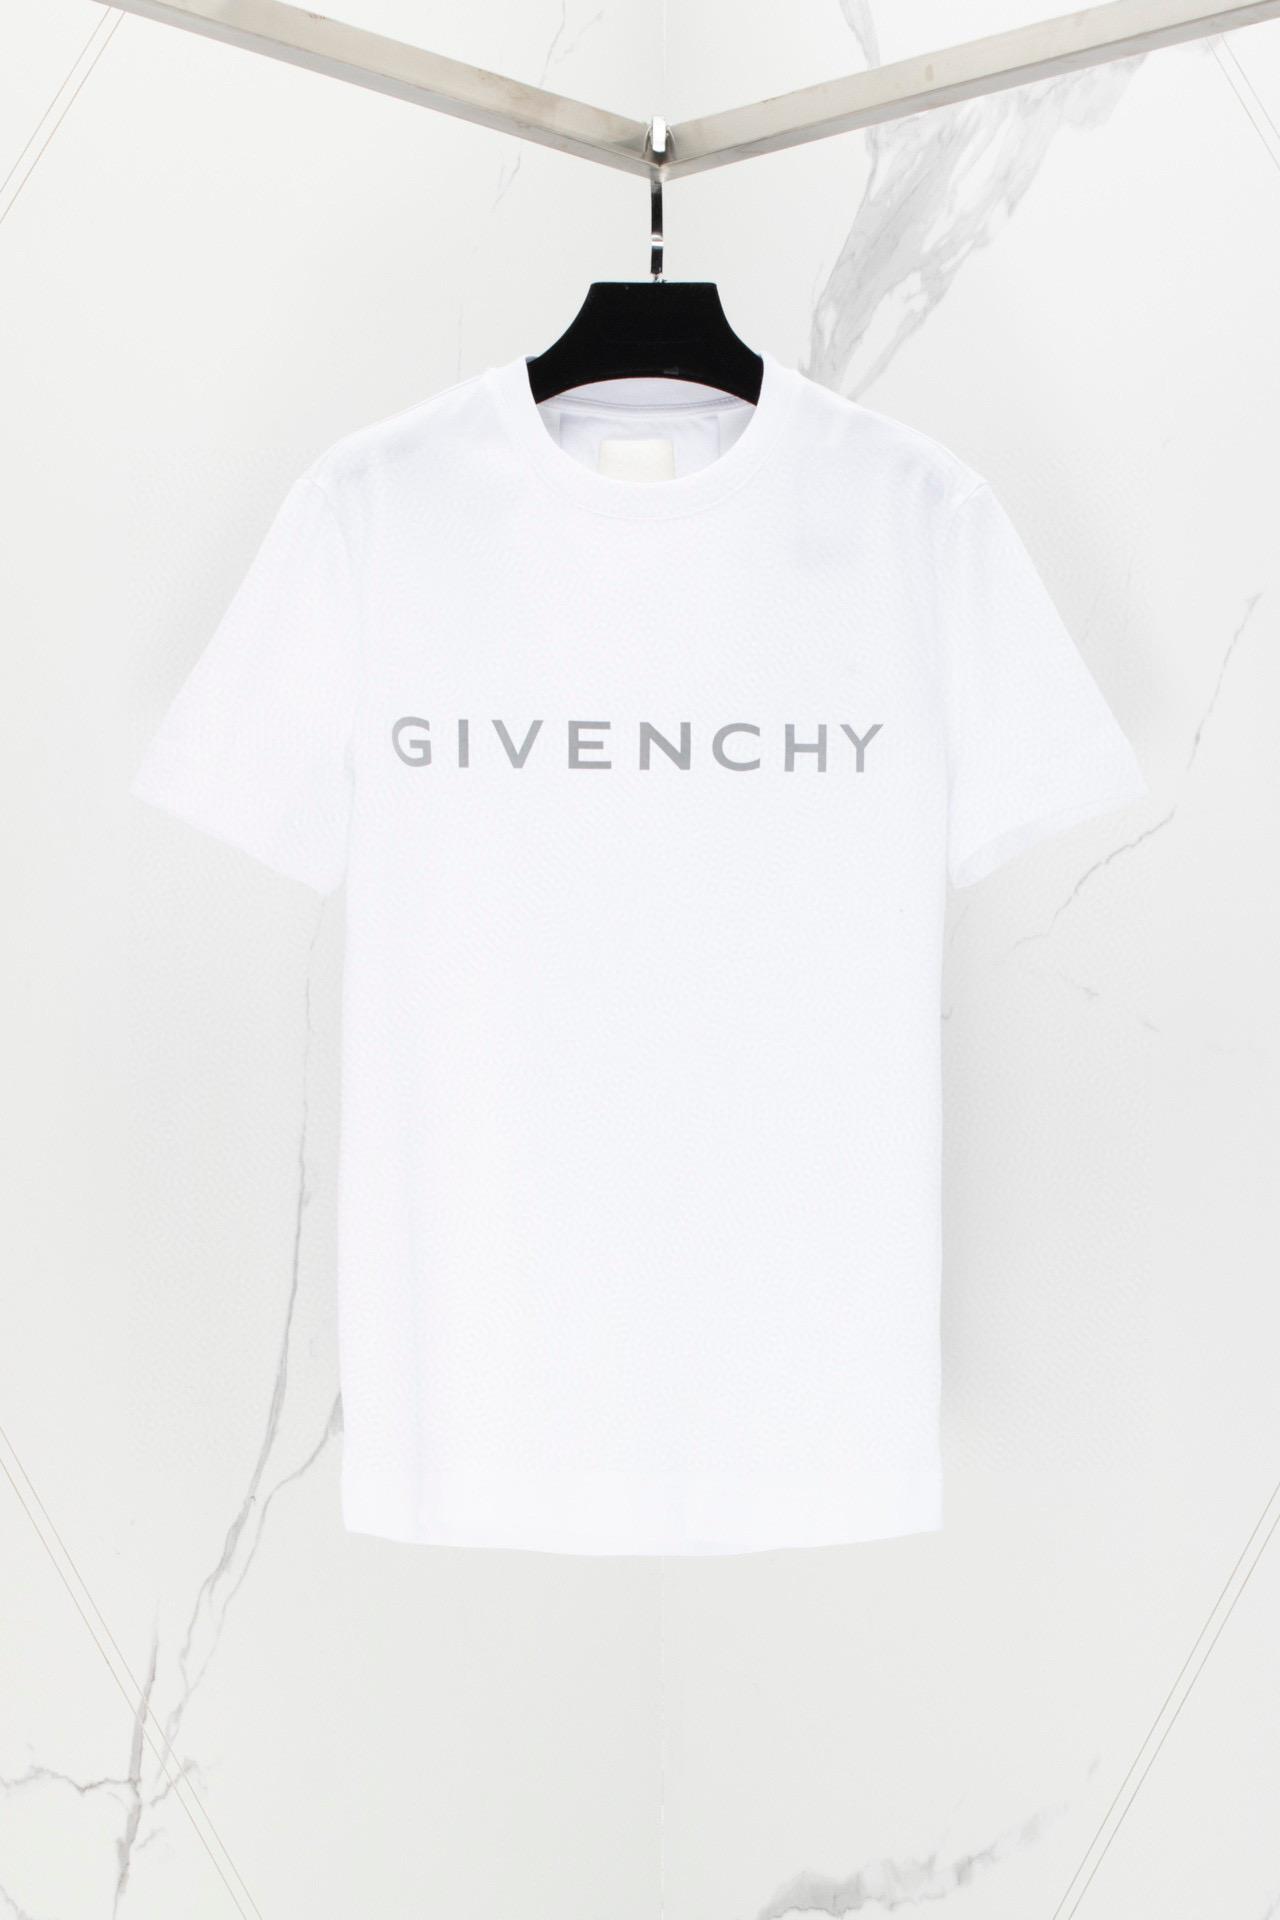 reflective-givenchy-slim-fit-t-shirt-in-cotton-6834_16845015982-1000